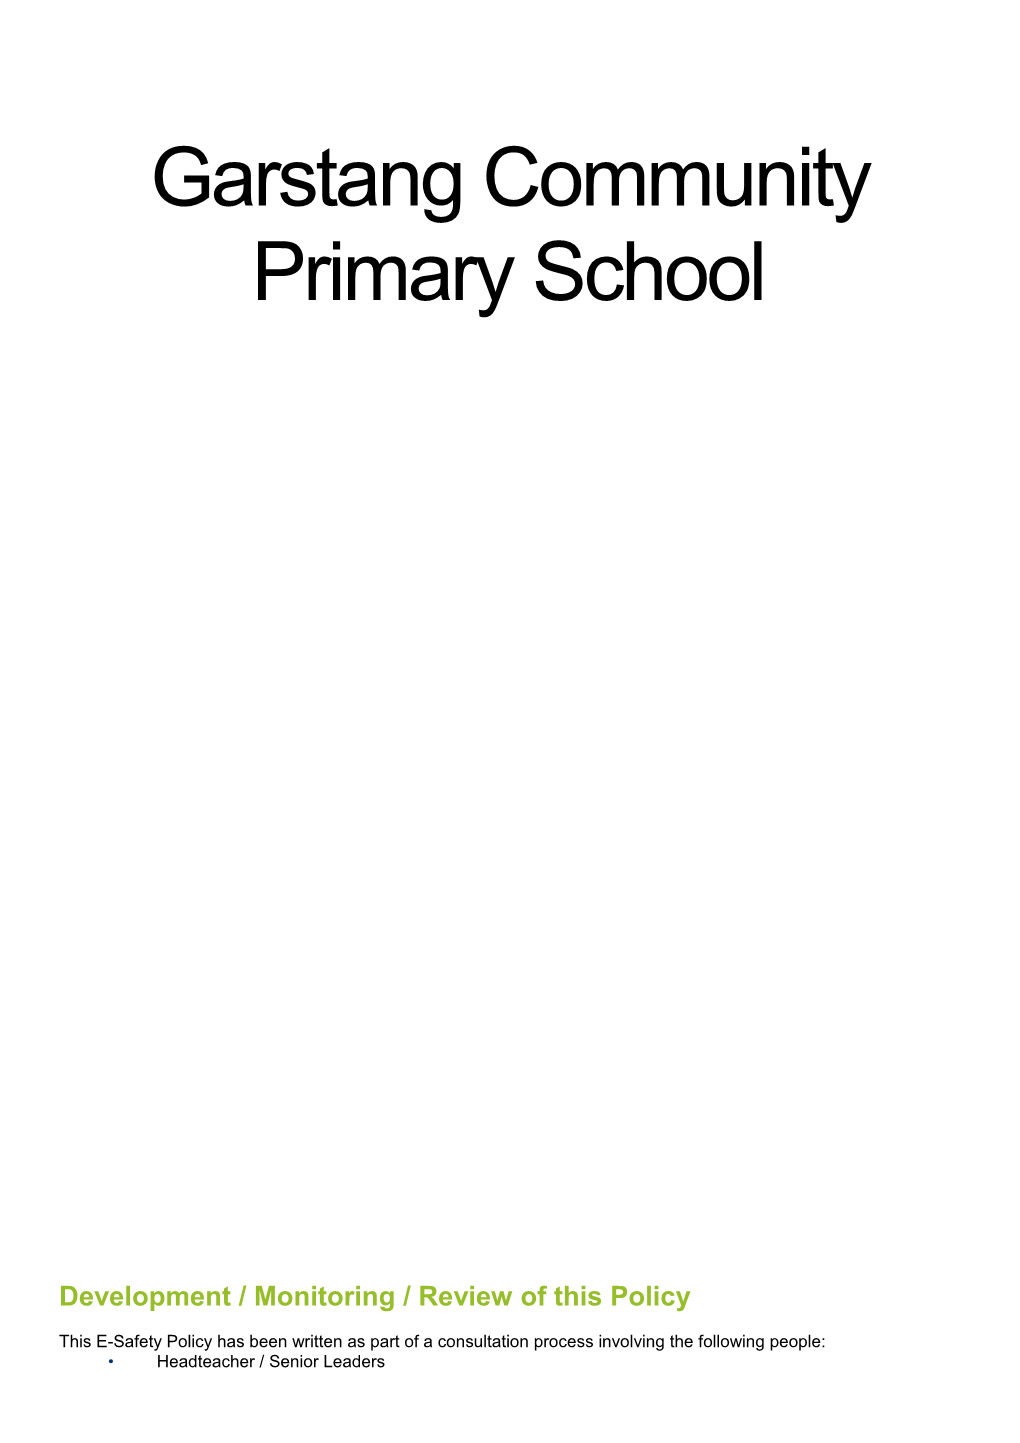 Garstang Community Primary School E-Safety Policy